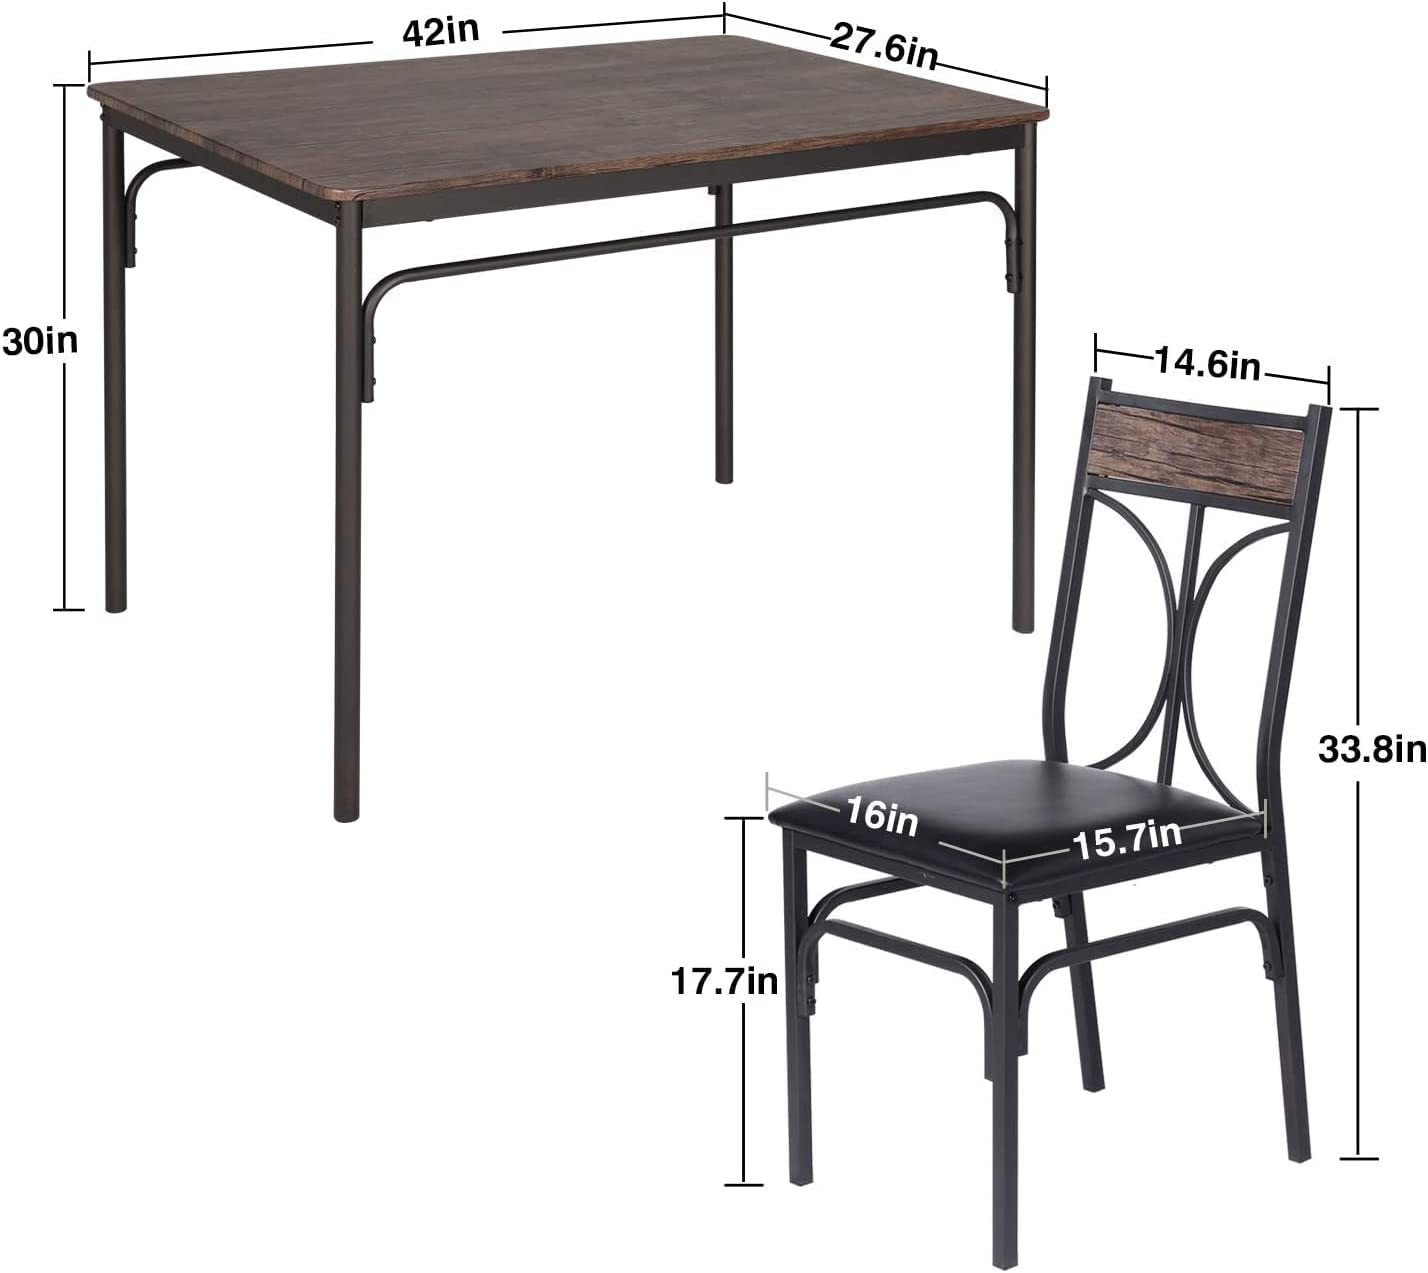 VECELO Industrial Style 5-Piece Modern Rectangular Dining Table Set with 4 Chairs for Dining Room/Kitchen